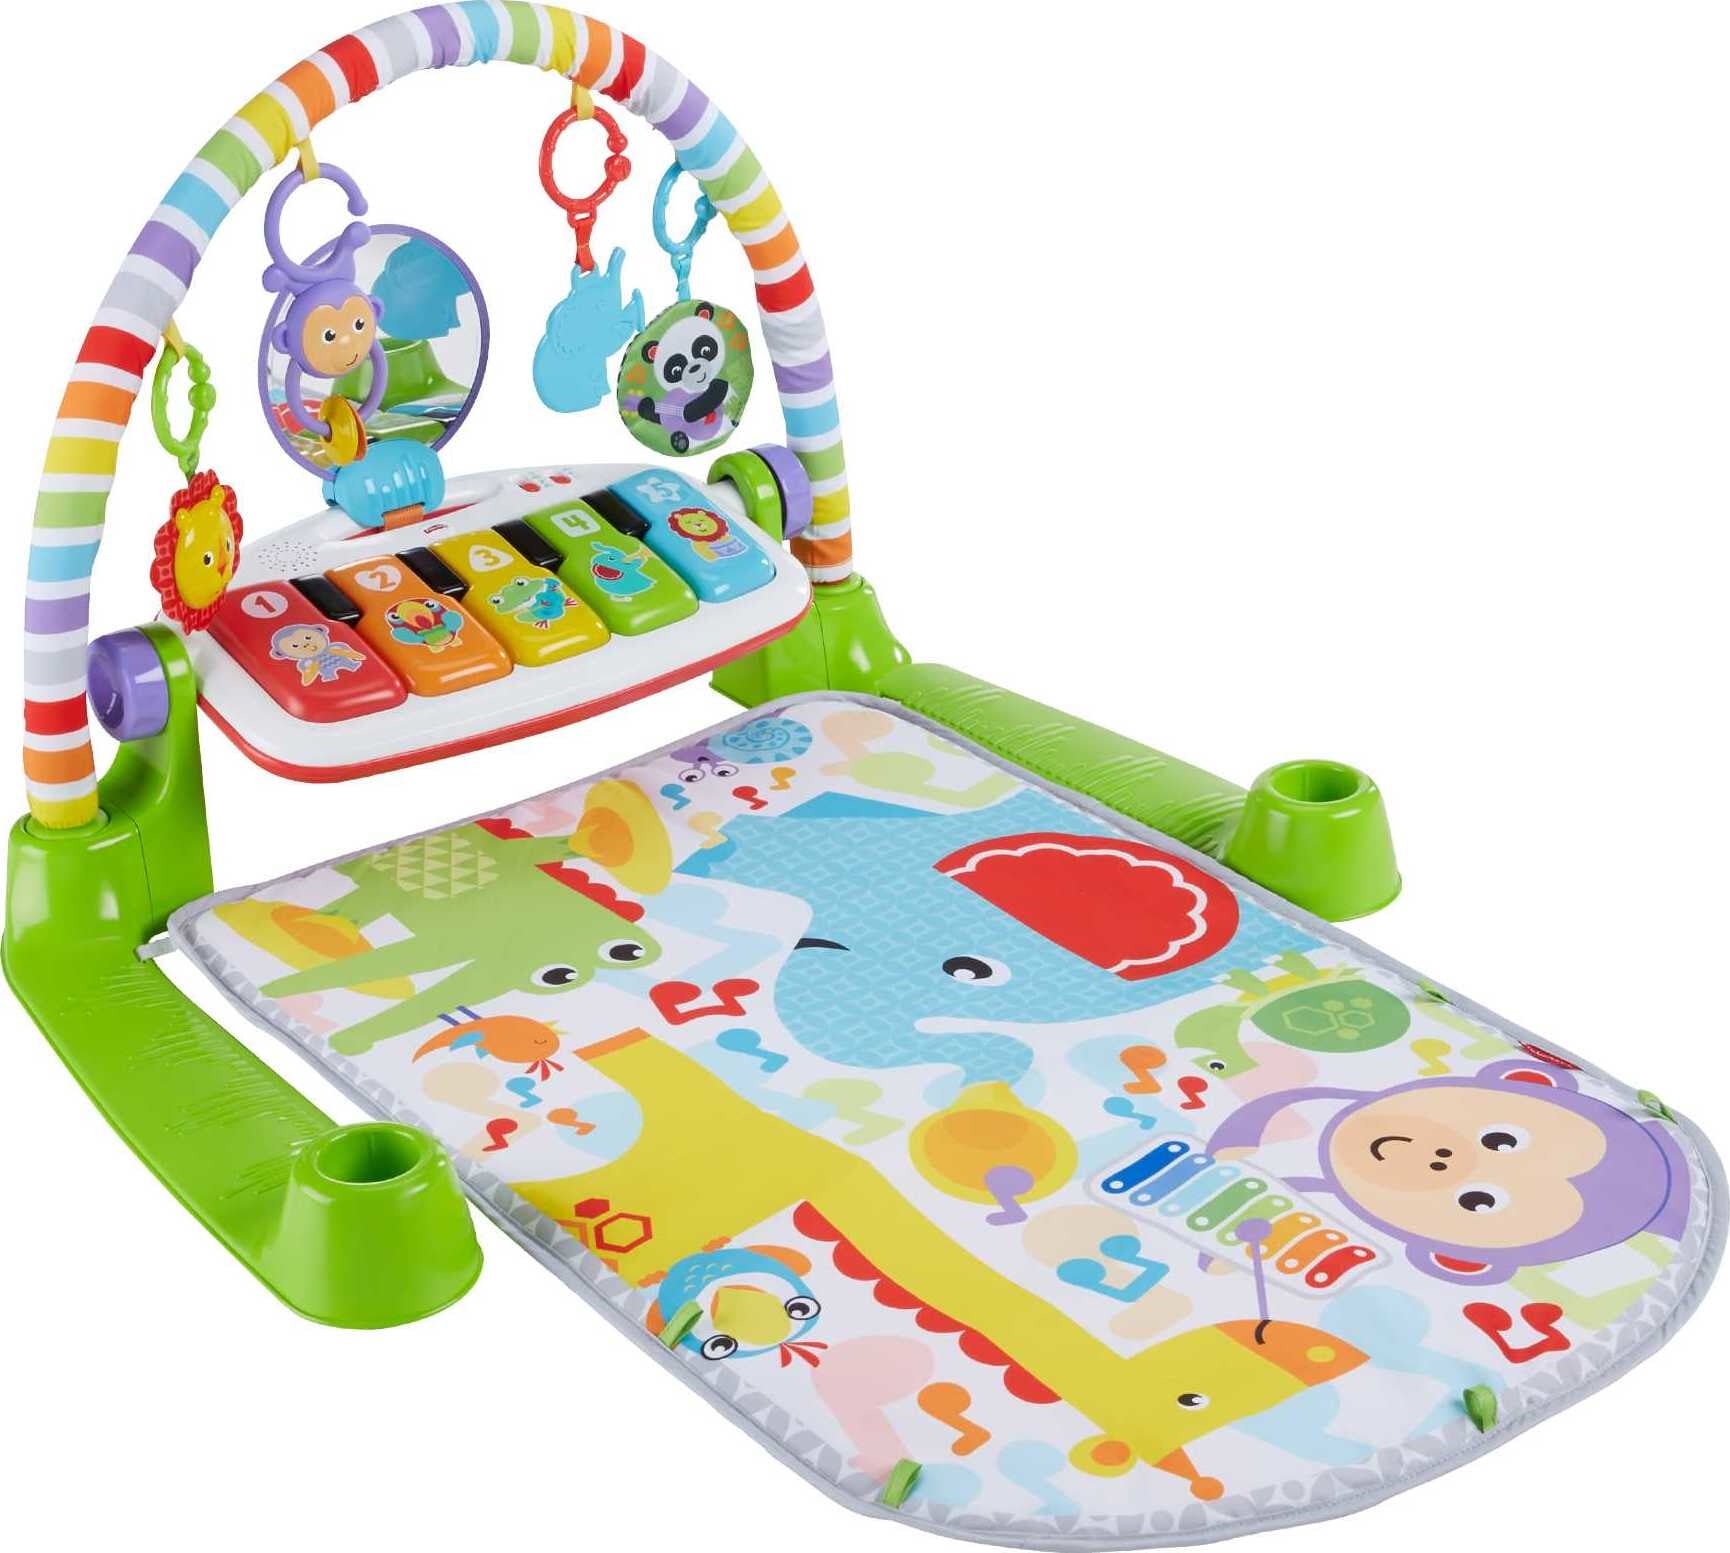 parachute Faculteit rib Fisher-Price Deluxe Kick & Play Piano Gym Infant Playmat with Electronic  Learning Toy, Green - Walmart.com